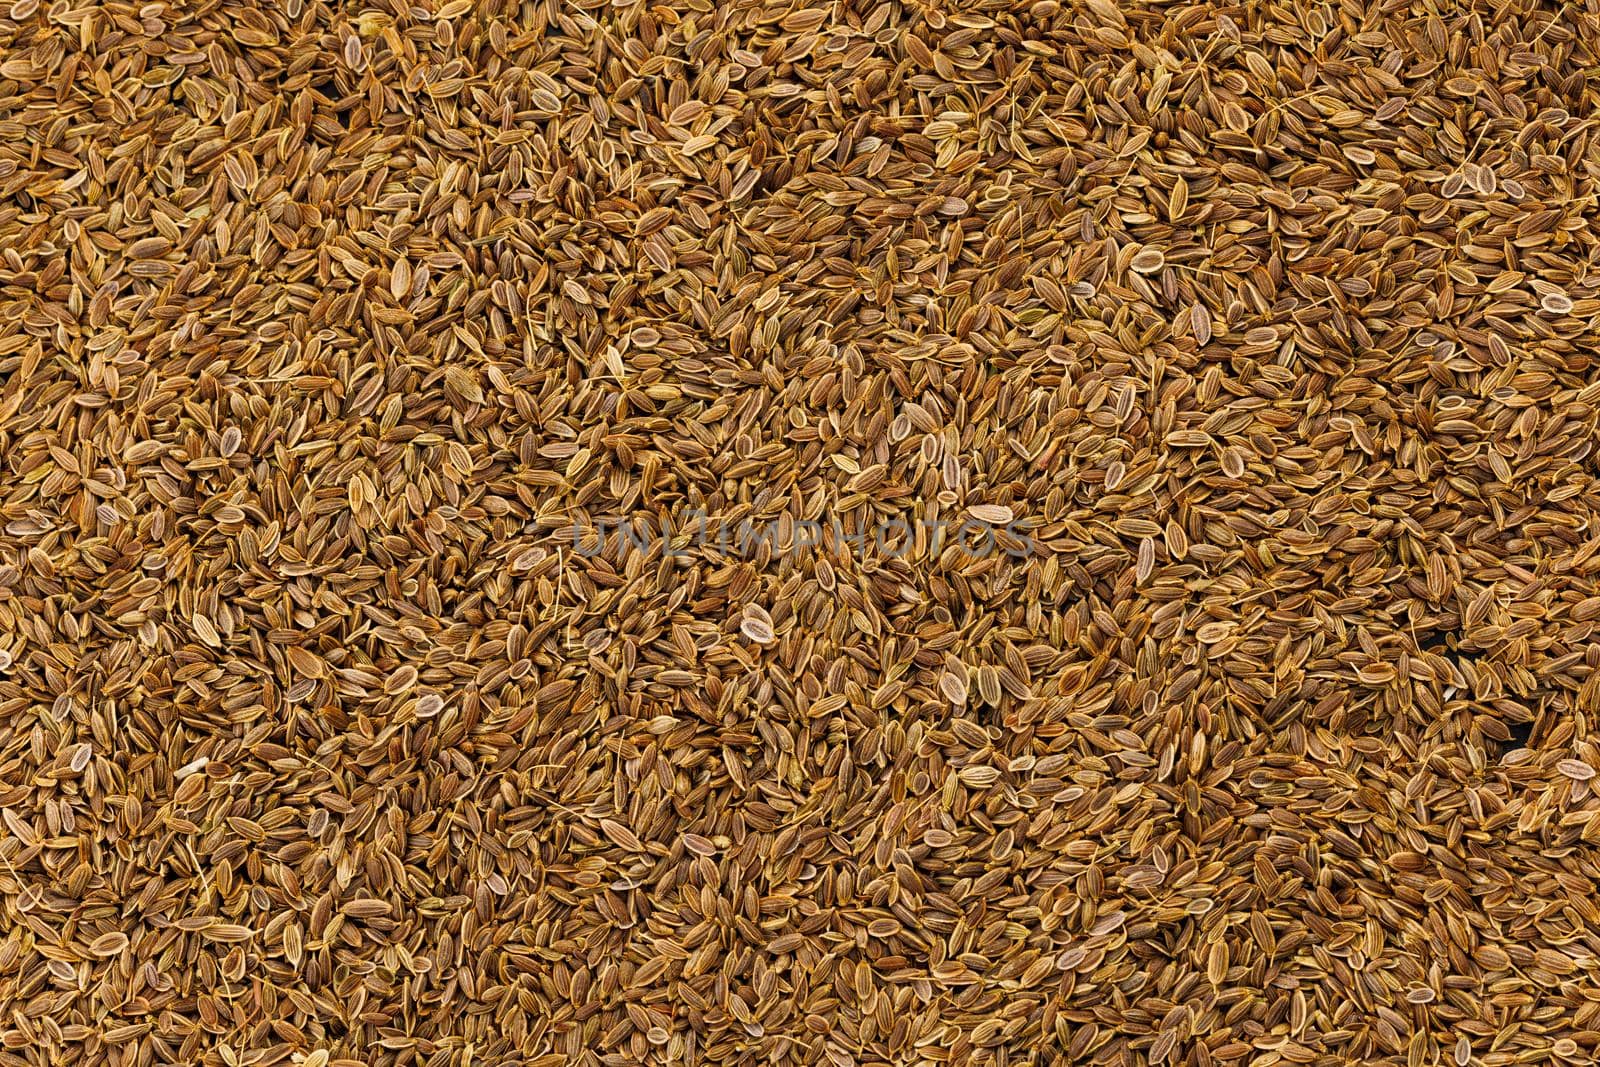 Dry Rolls Dill - Anethum graveolens - seeds on flat surface, flat texture and full-frame background. It is only species in genus Anethum. Seeds are used as herb or spice for flavouring food.